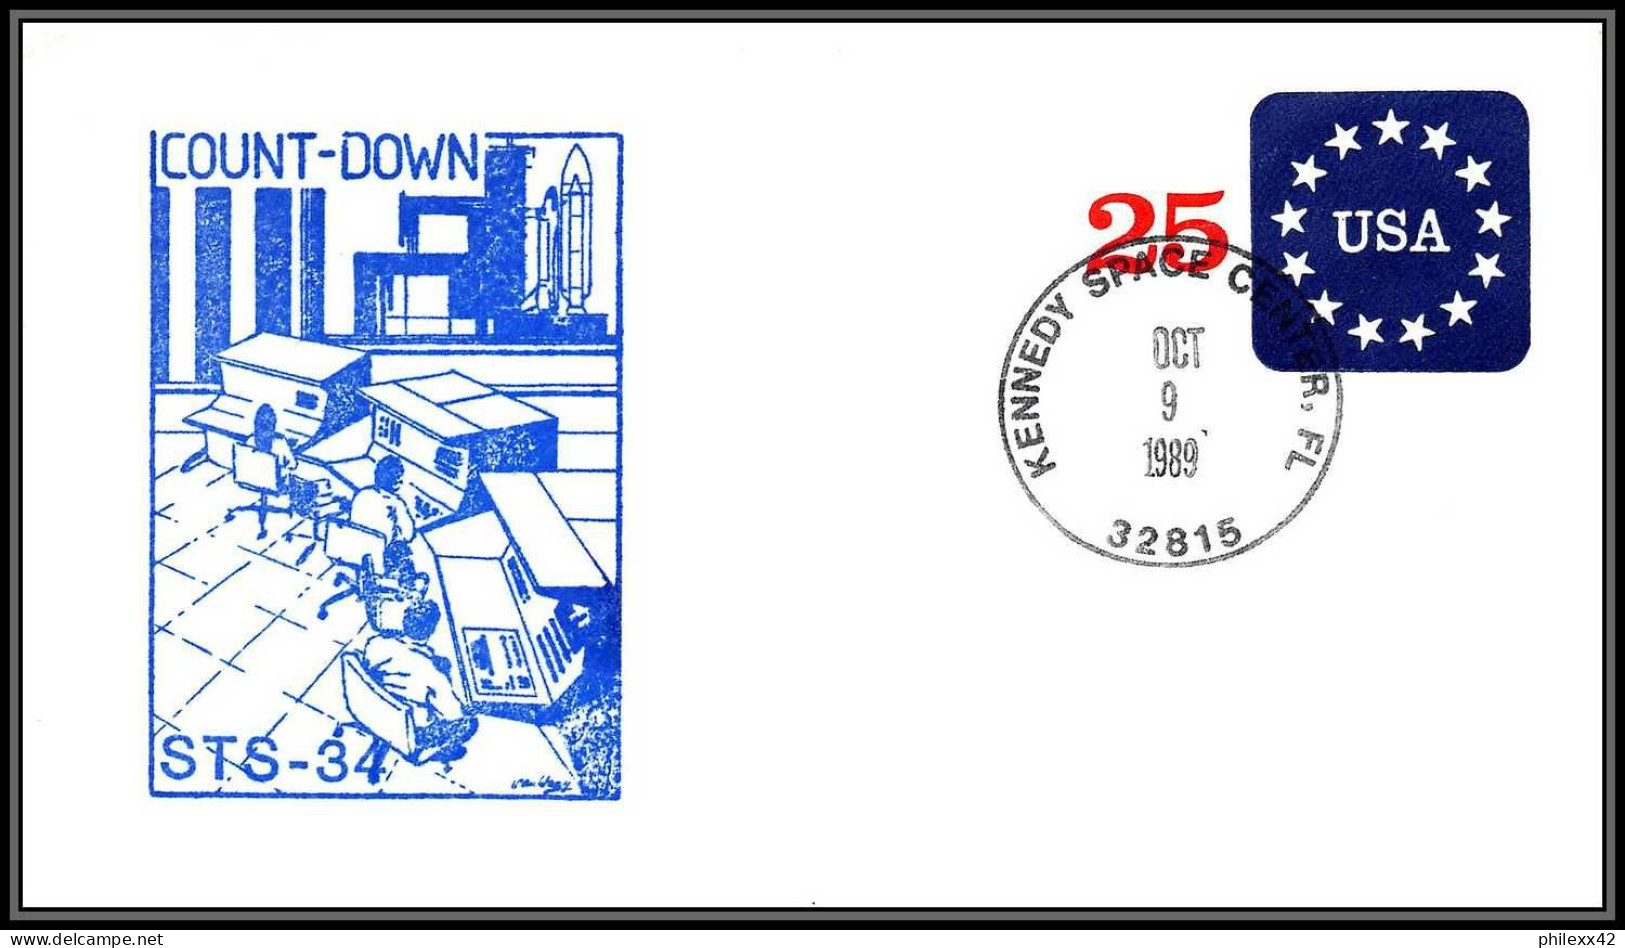 1814 Espace (space) Entier Postal (Stamped Stationery) USA STS 34 Count Down Atlantis Navette Shuttle - 9/10/1989 - USA